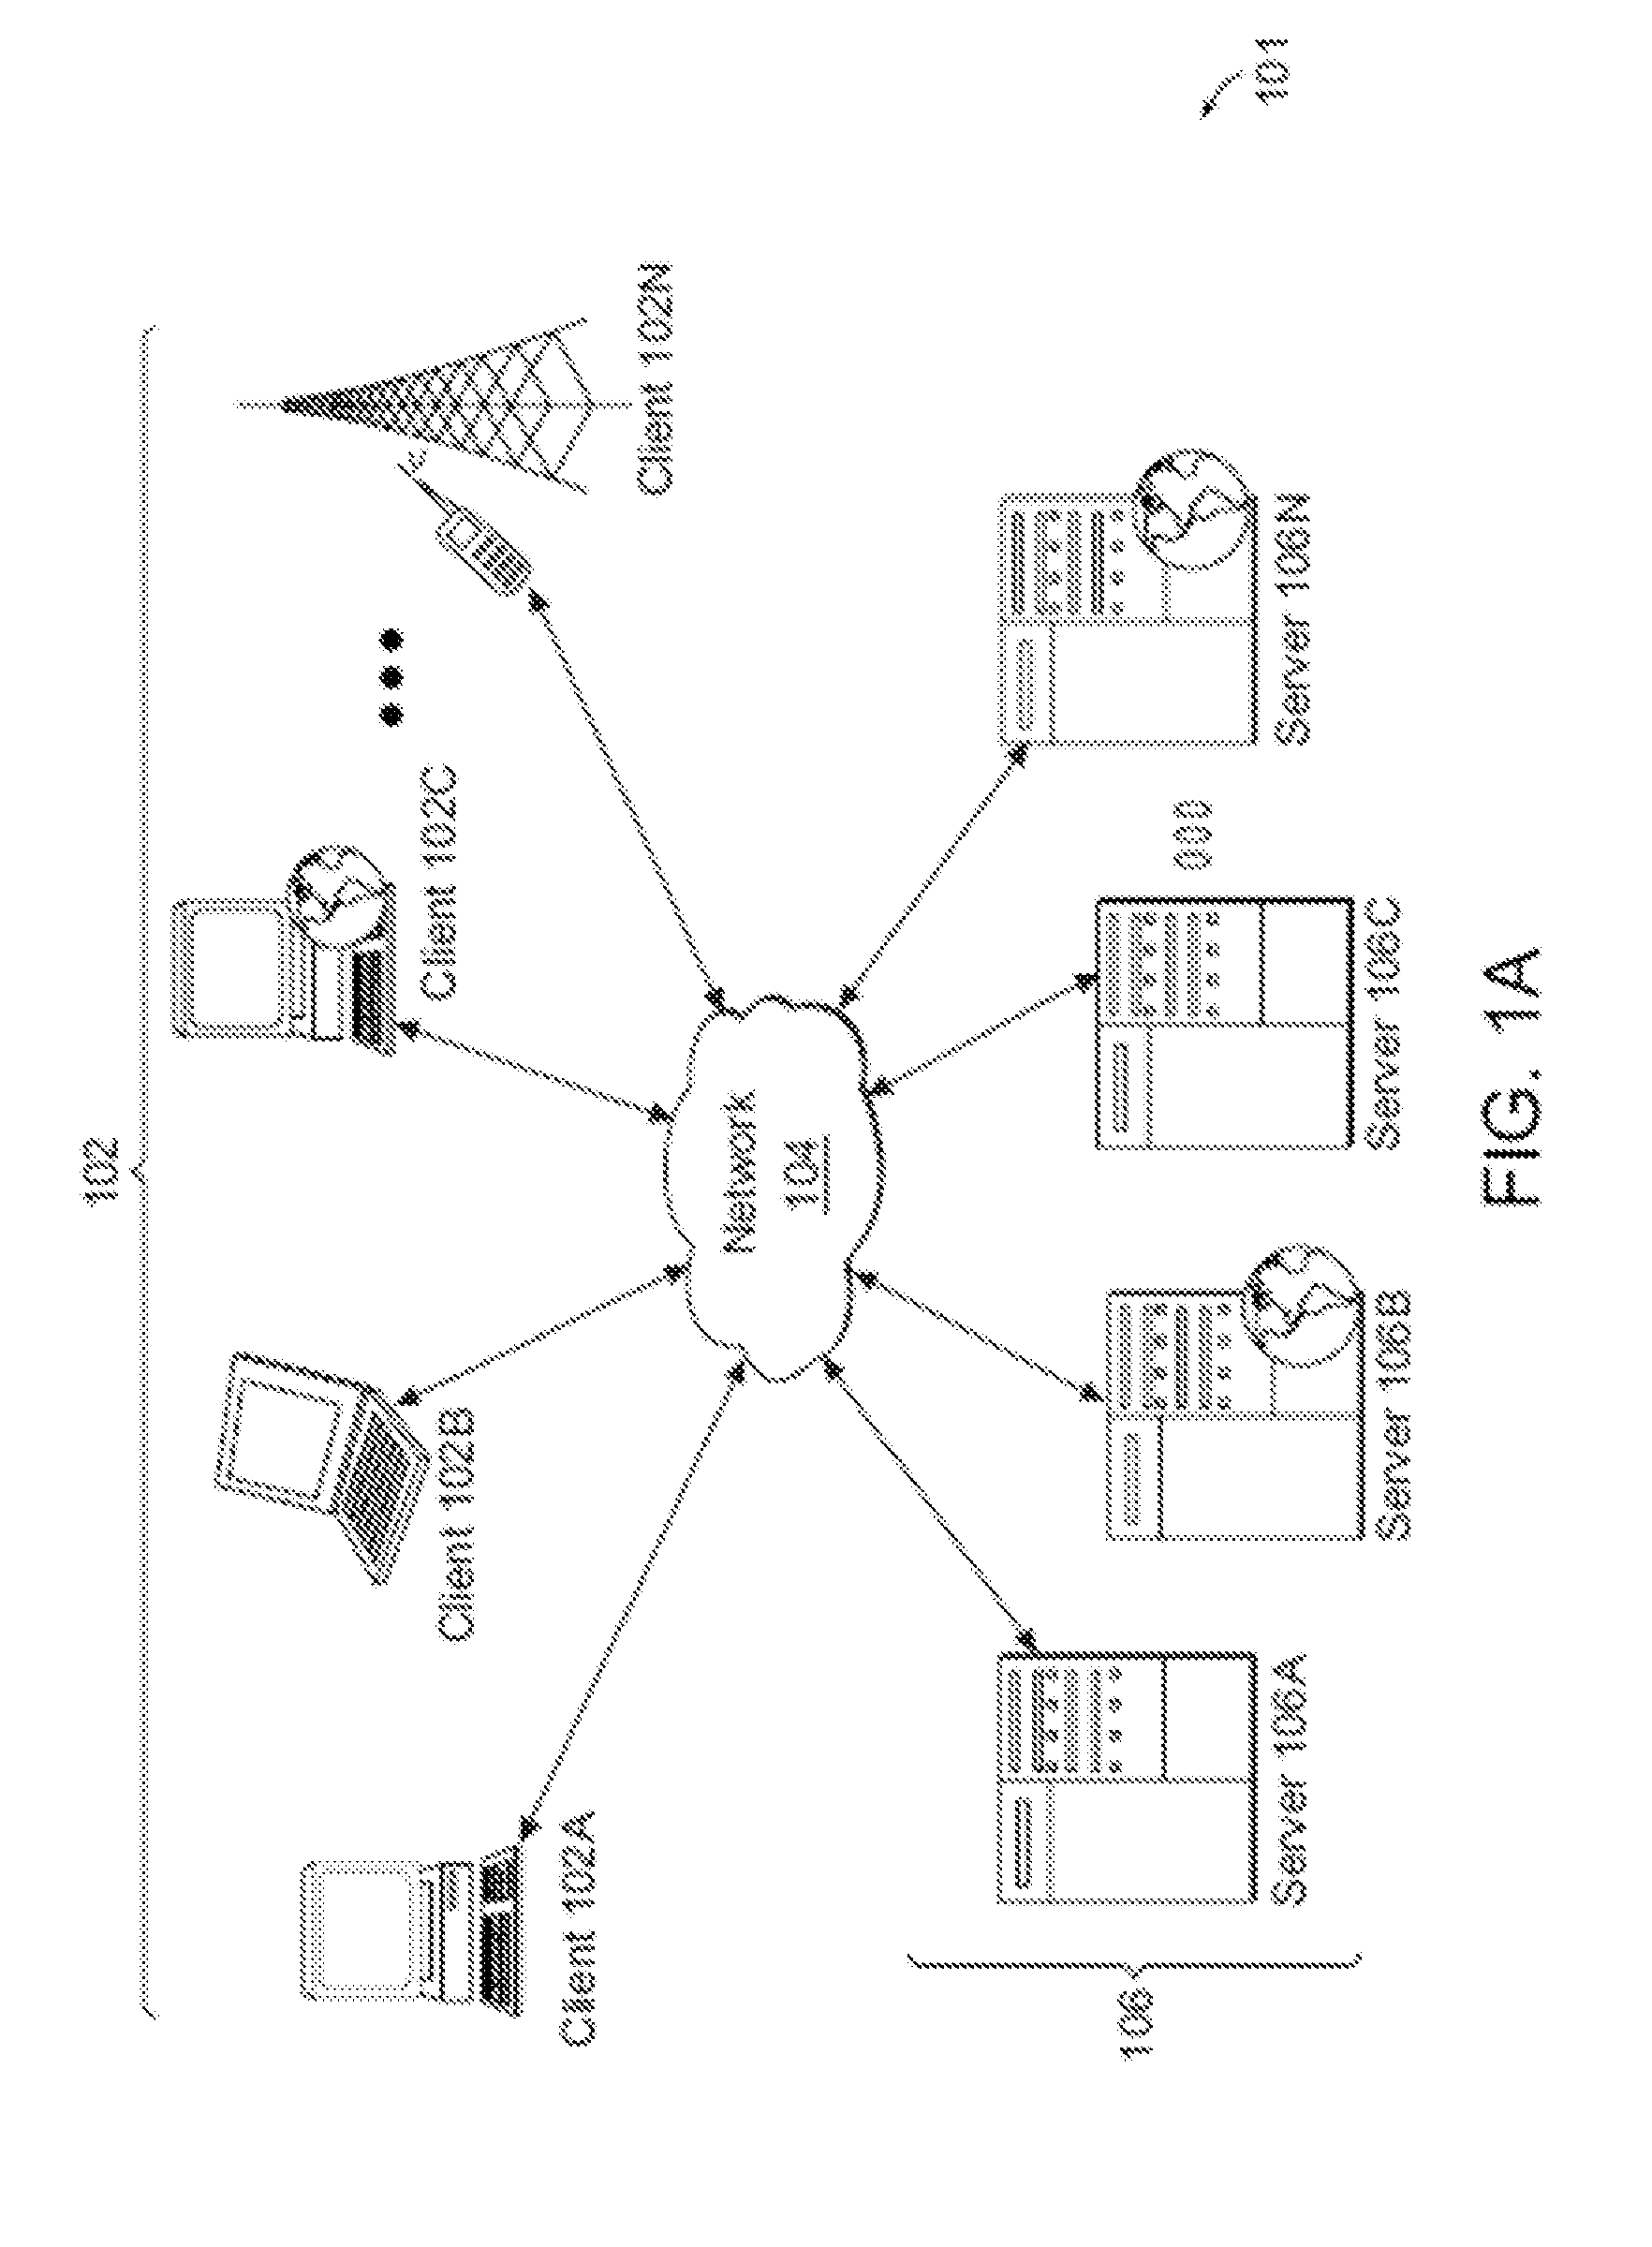 Methods and systems for maintaining state in a virtual machine when disconnected from graphics hardware